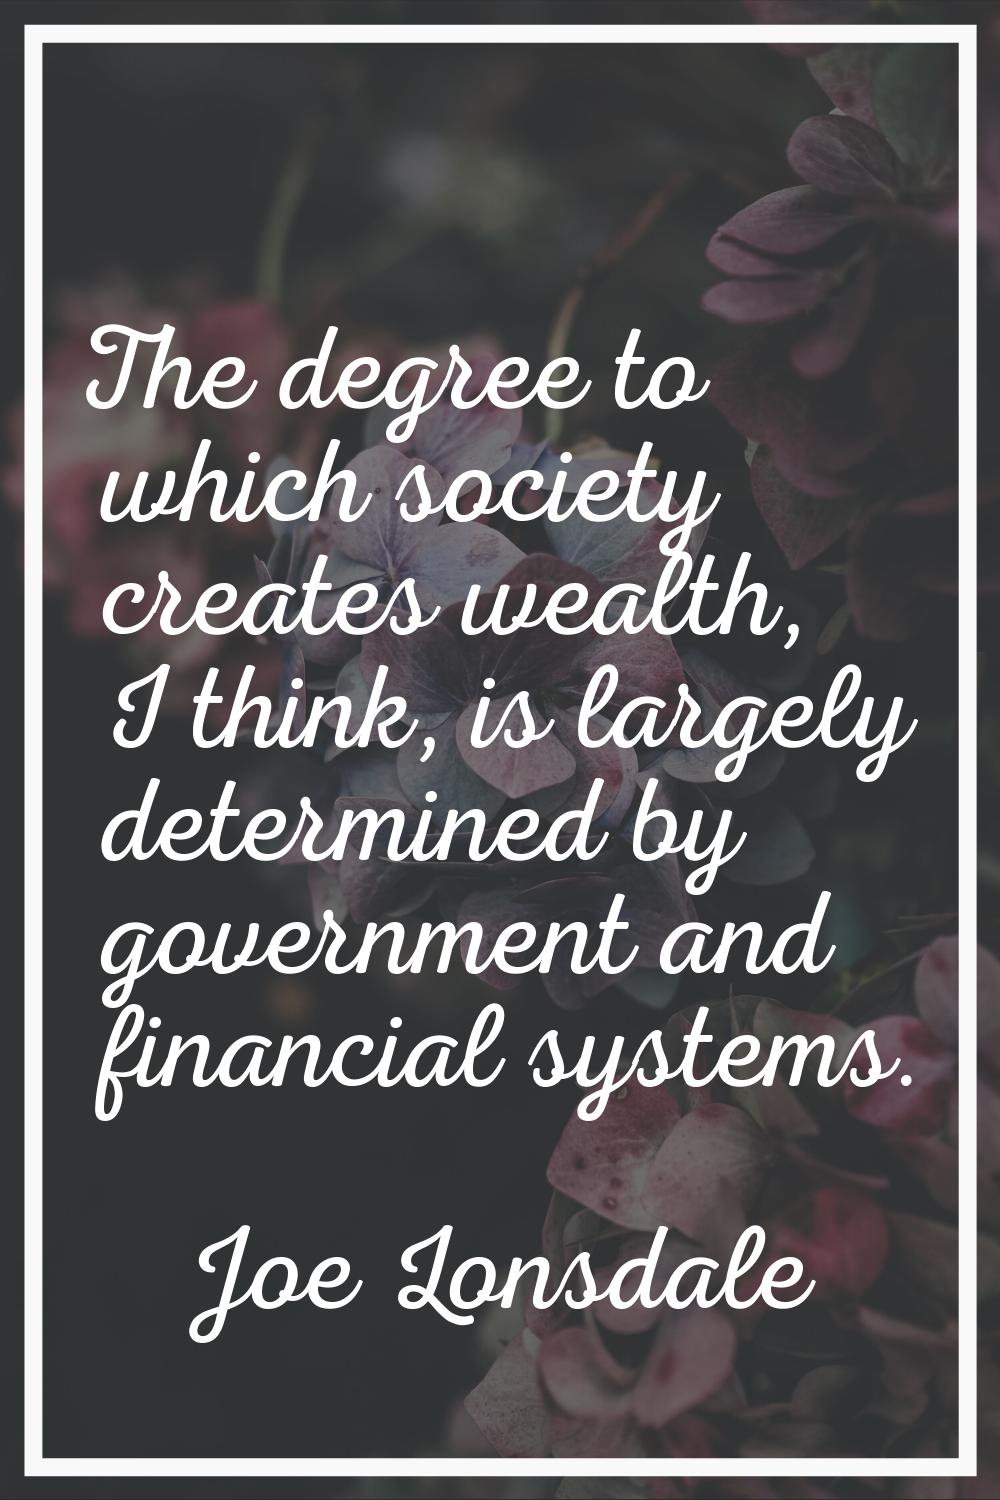 The degree to which society creates wealth, I think, is largely determined by government and financ